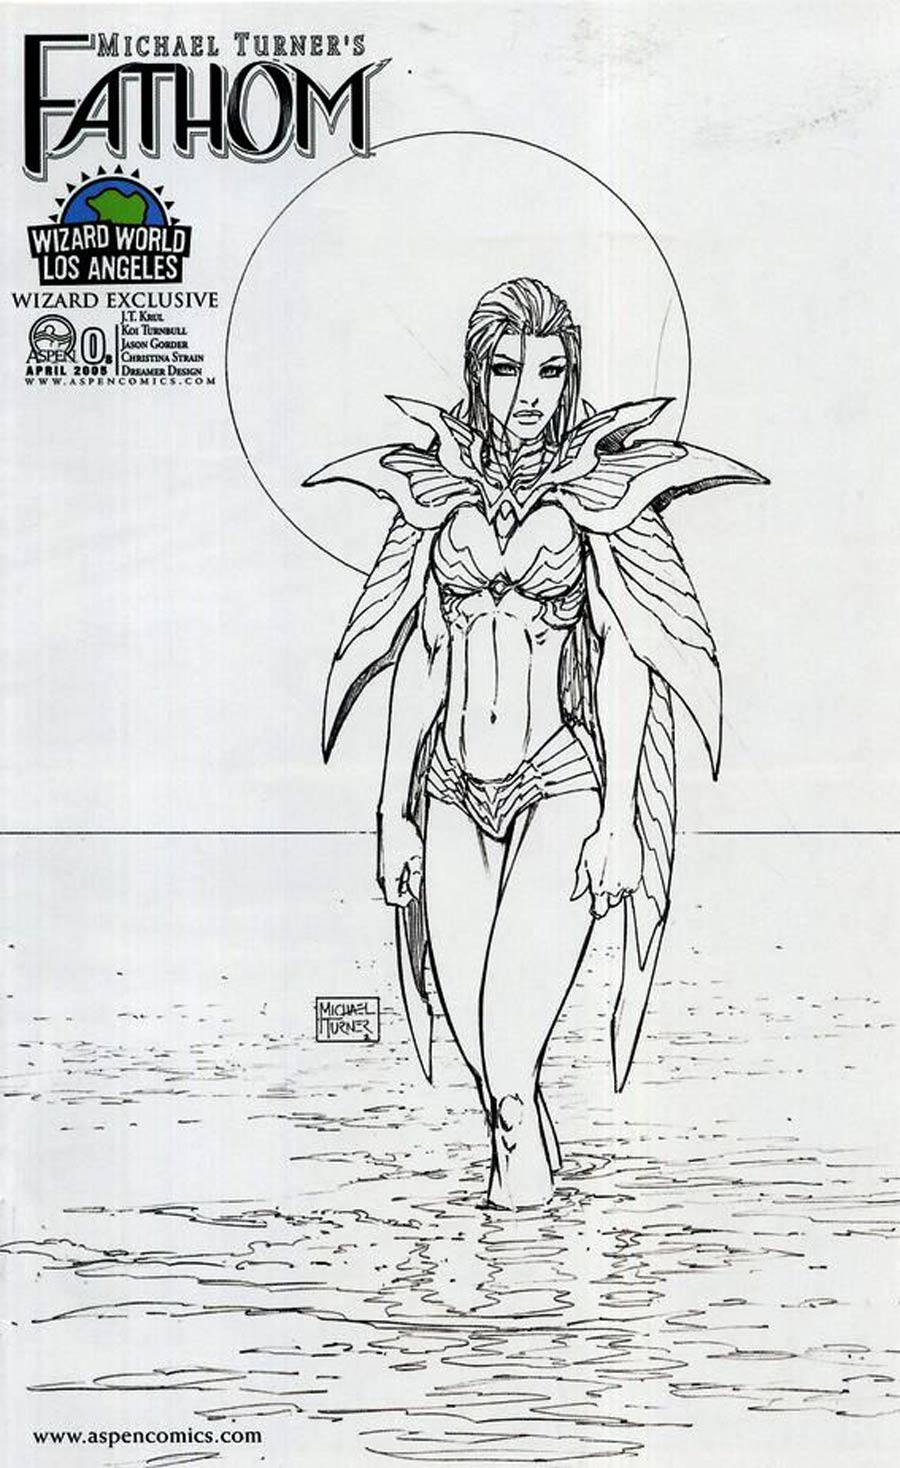 Fathom Vol 2 #0 Cover B Wizard World Los Angeles Exclusive Michael Turner Sketch Cover